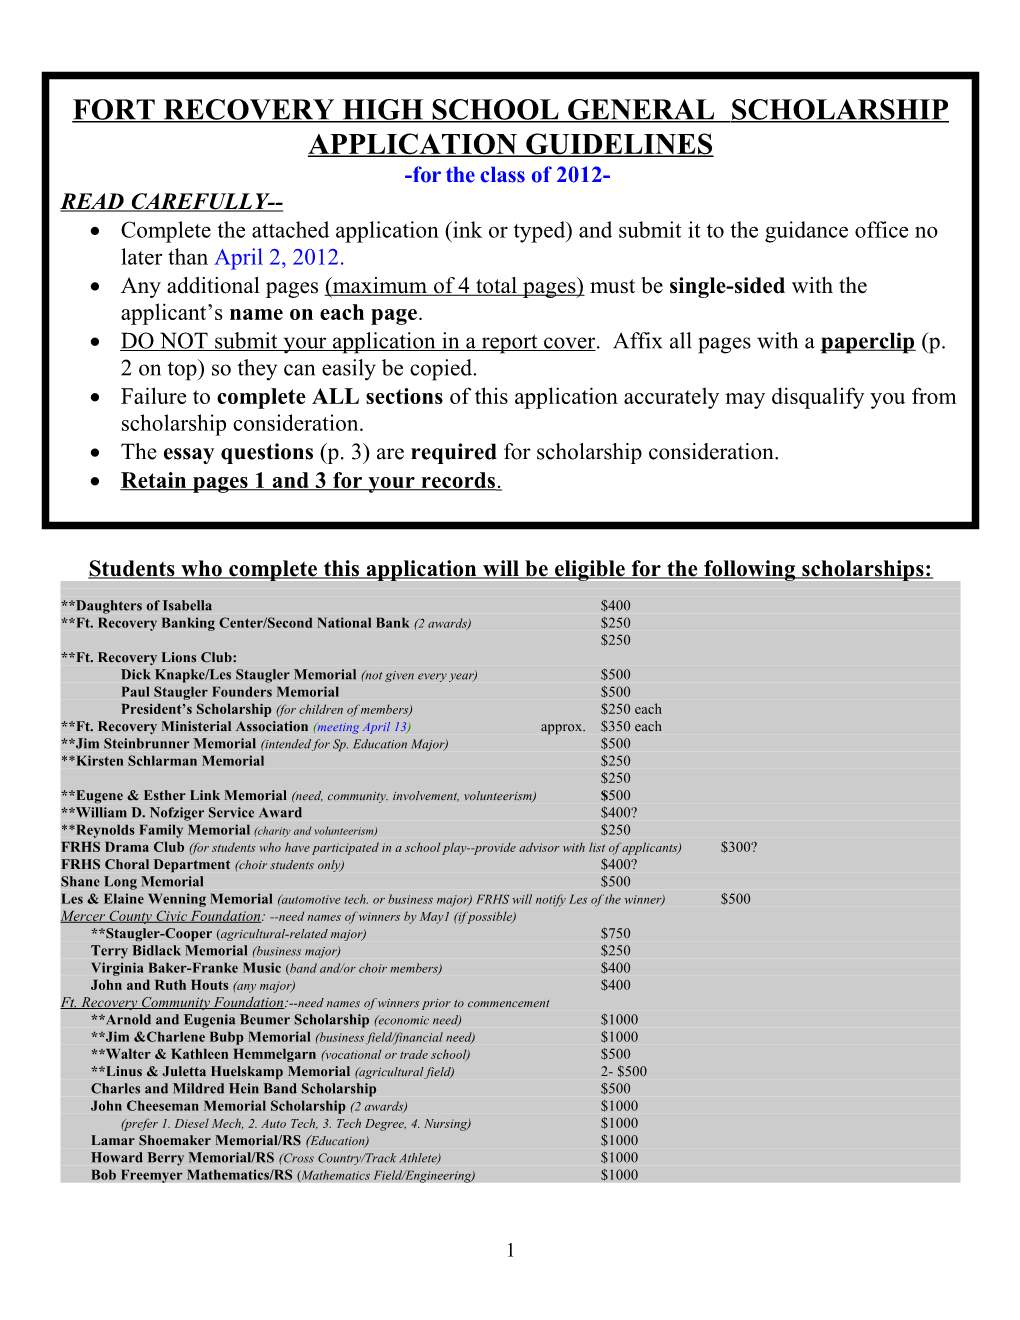 Fort Recovery High School General Scholarship Application